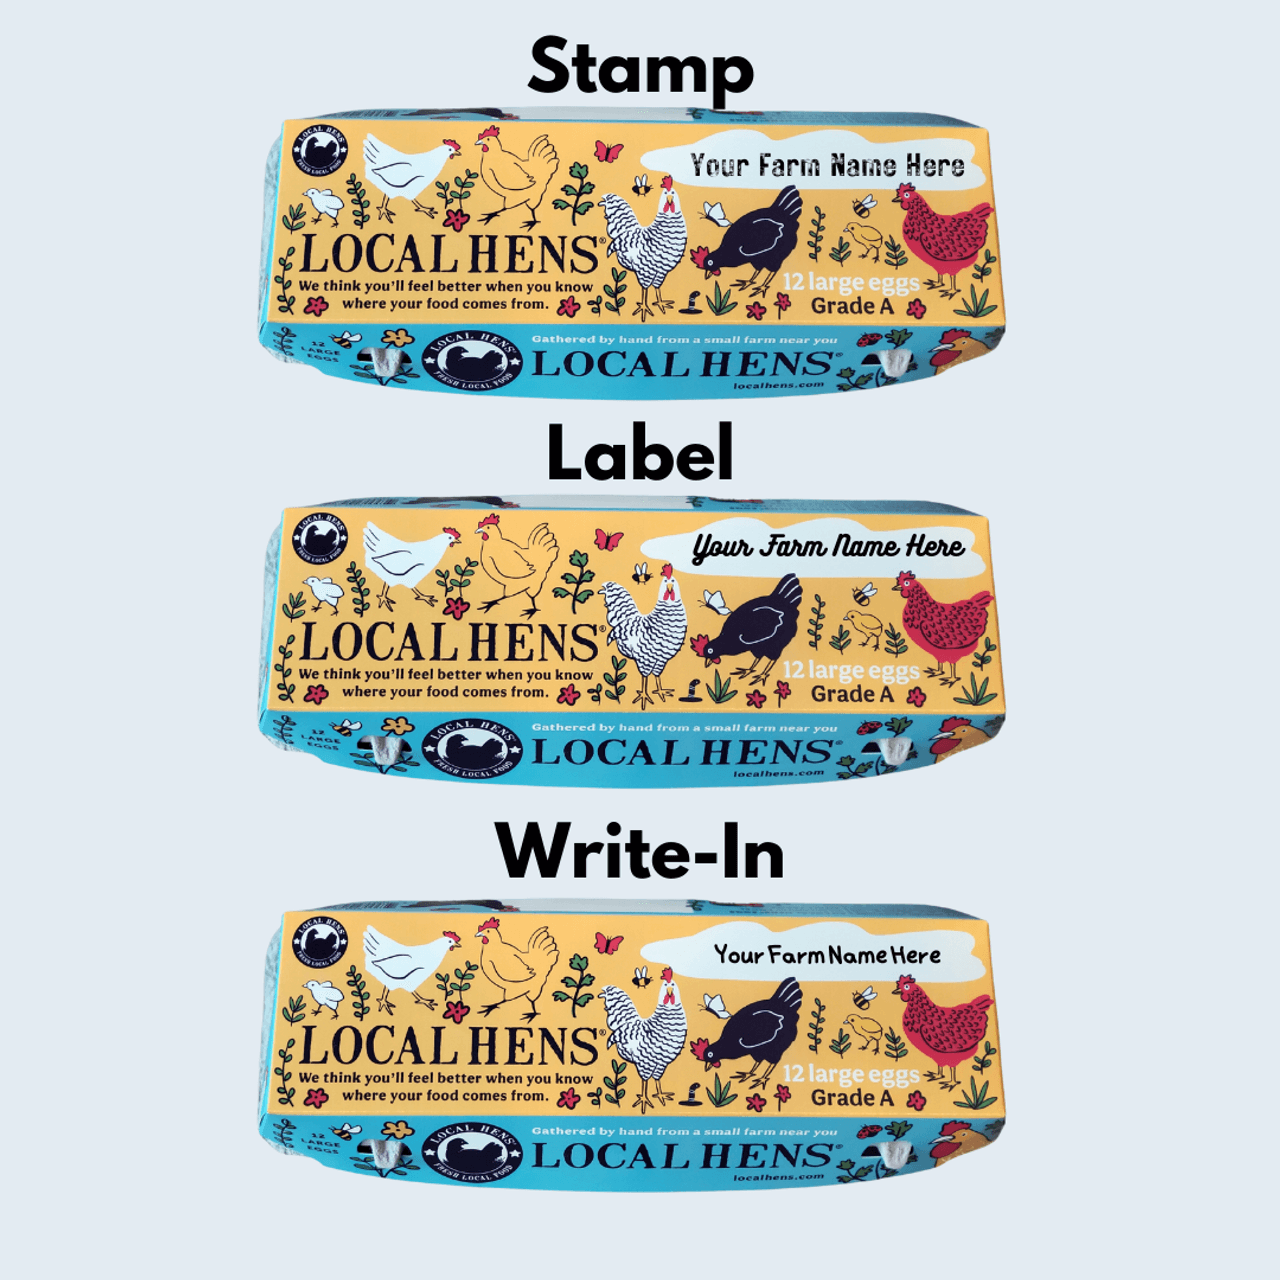 Self Inking Stamp for Personalized Egg Box Saying Hand Gathered Eggs Then  Your Farm Name as a Custom Stamp Self Inking for Business Large Rubber